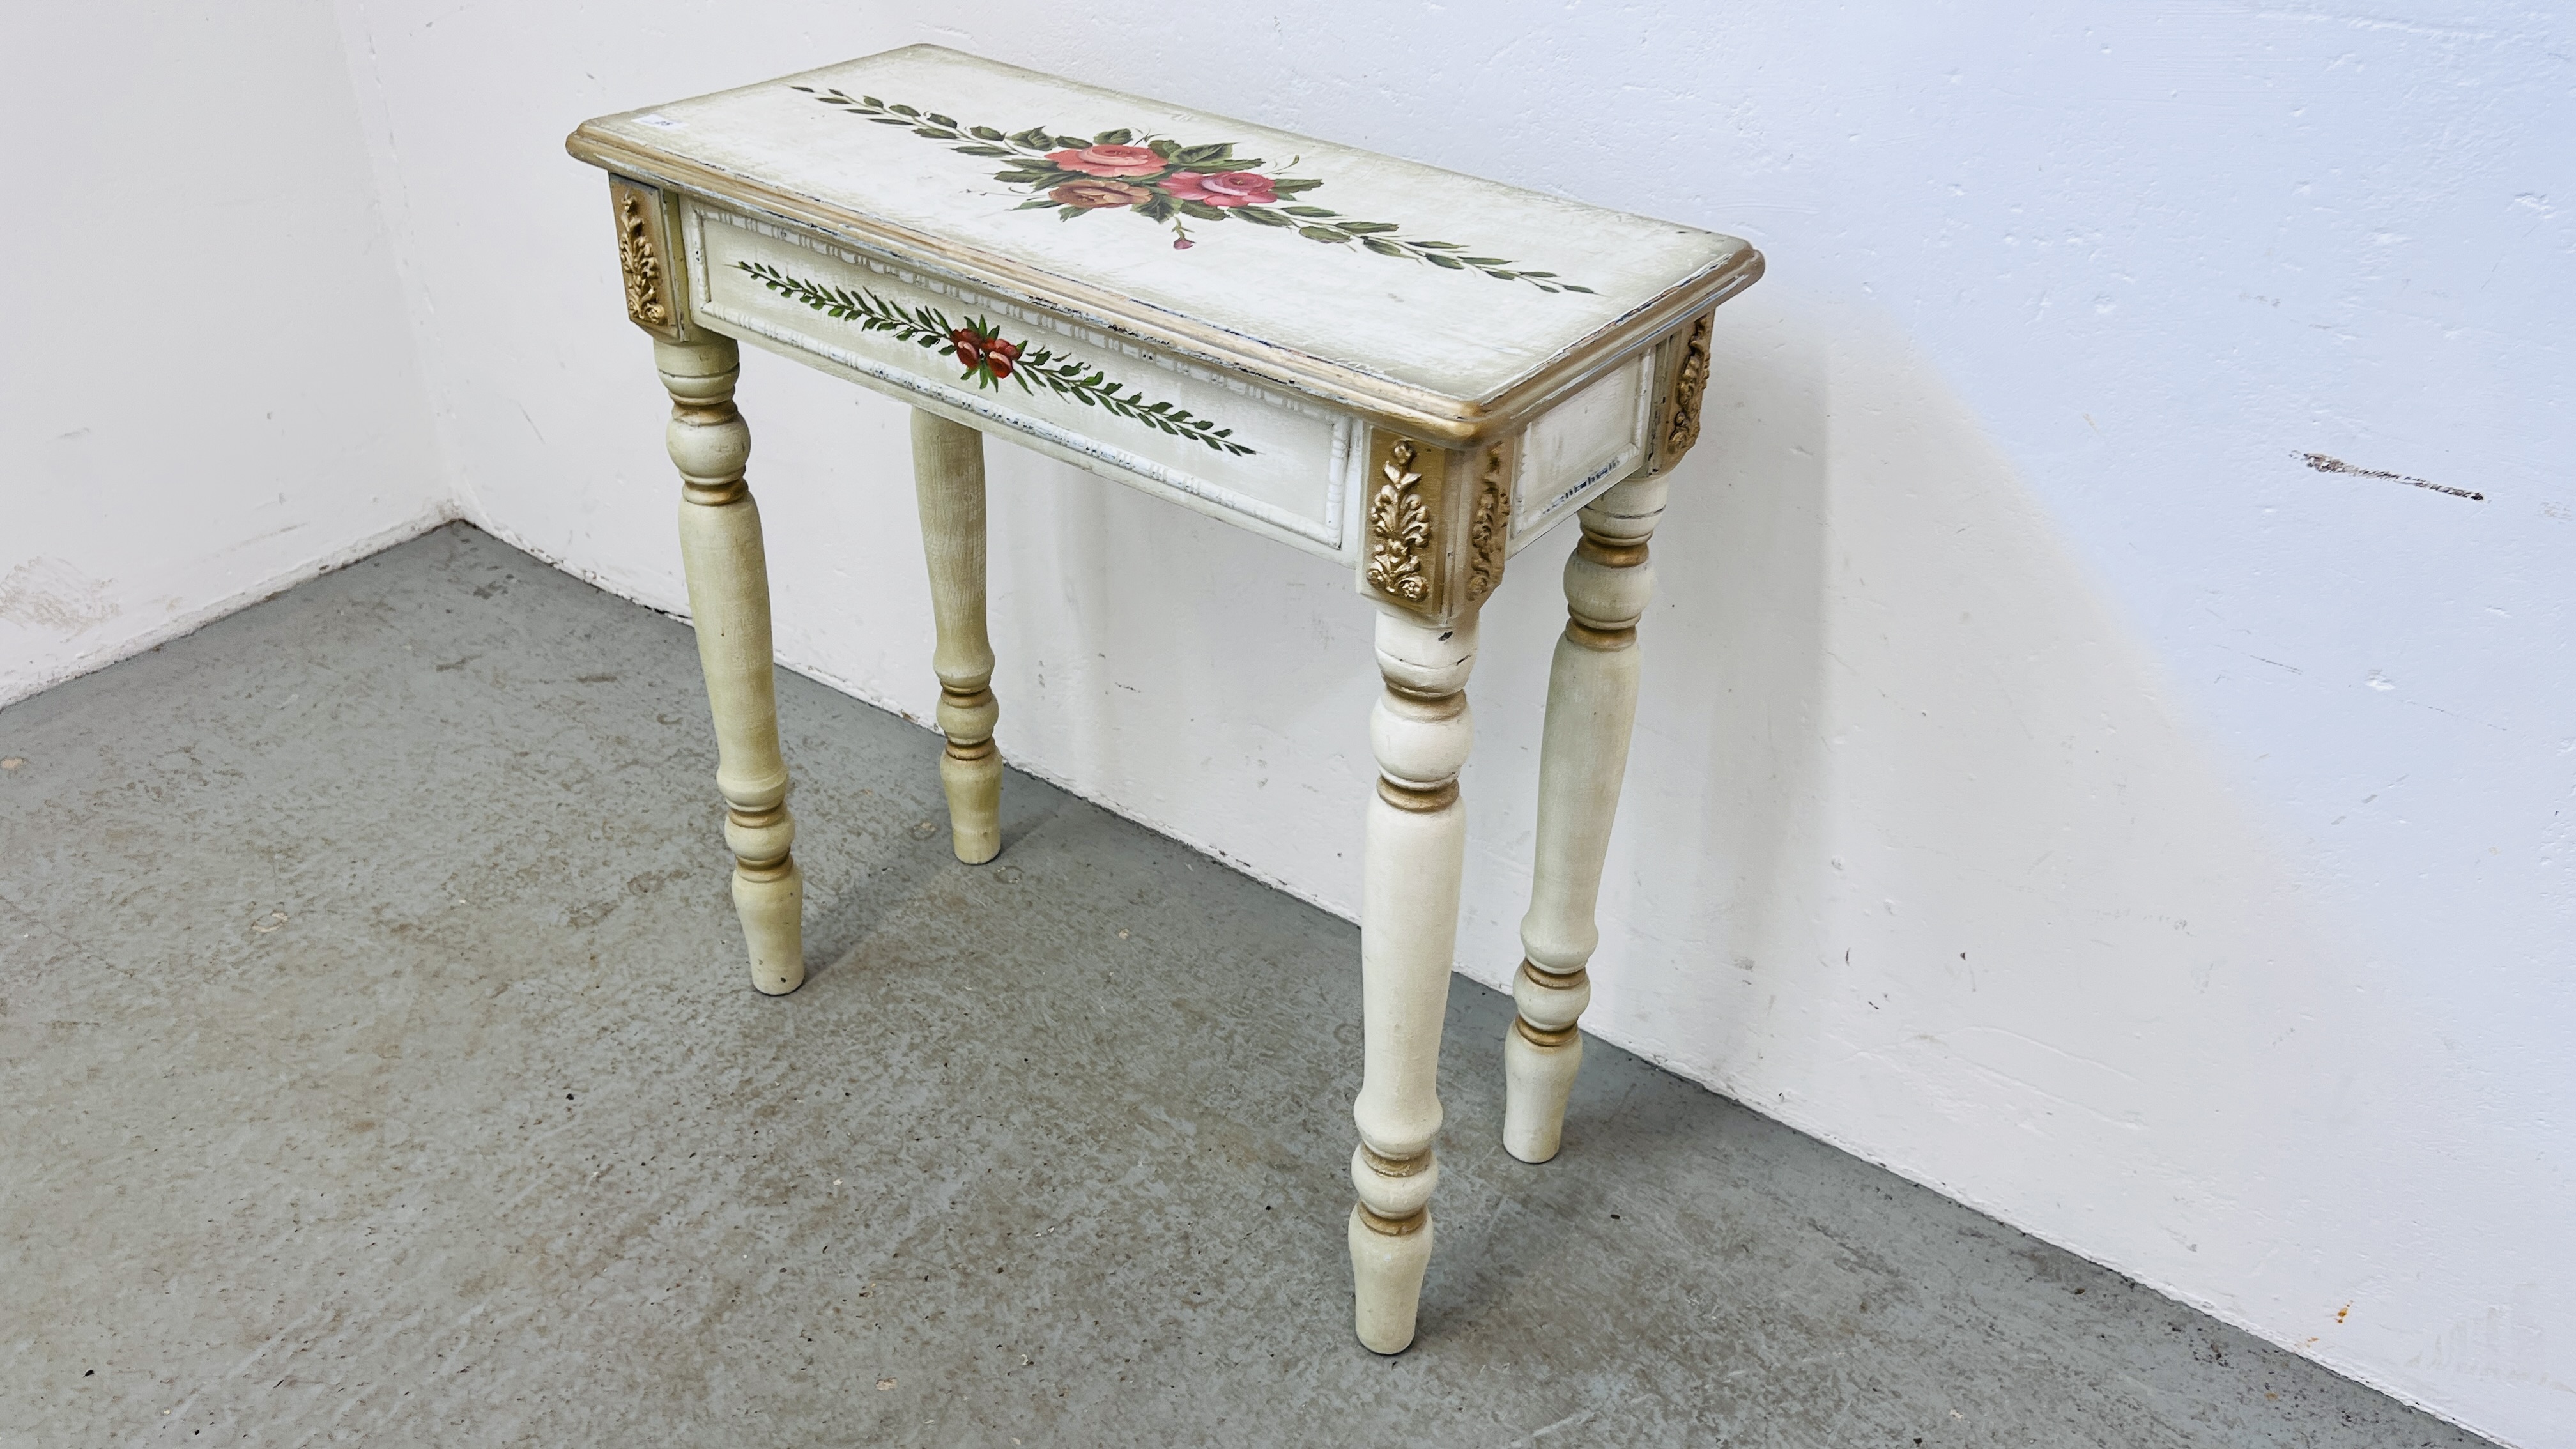 A SHABBY CHIC HALL TABLE WITH HAND PAINTED ROSE GARLAND DESIGN WIDTH 76CM. DEPTH 35CM. HEIGHT 77CM. - Image 2 of 5